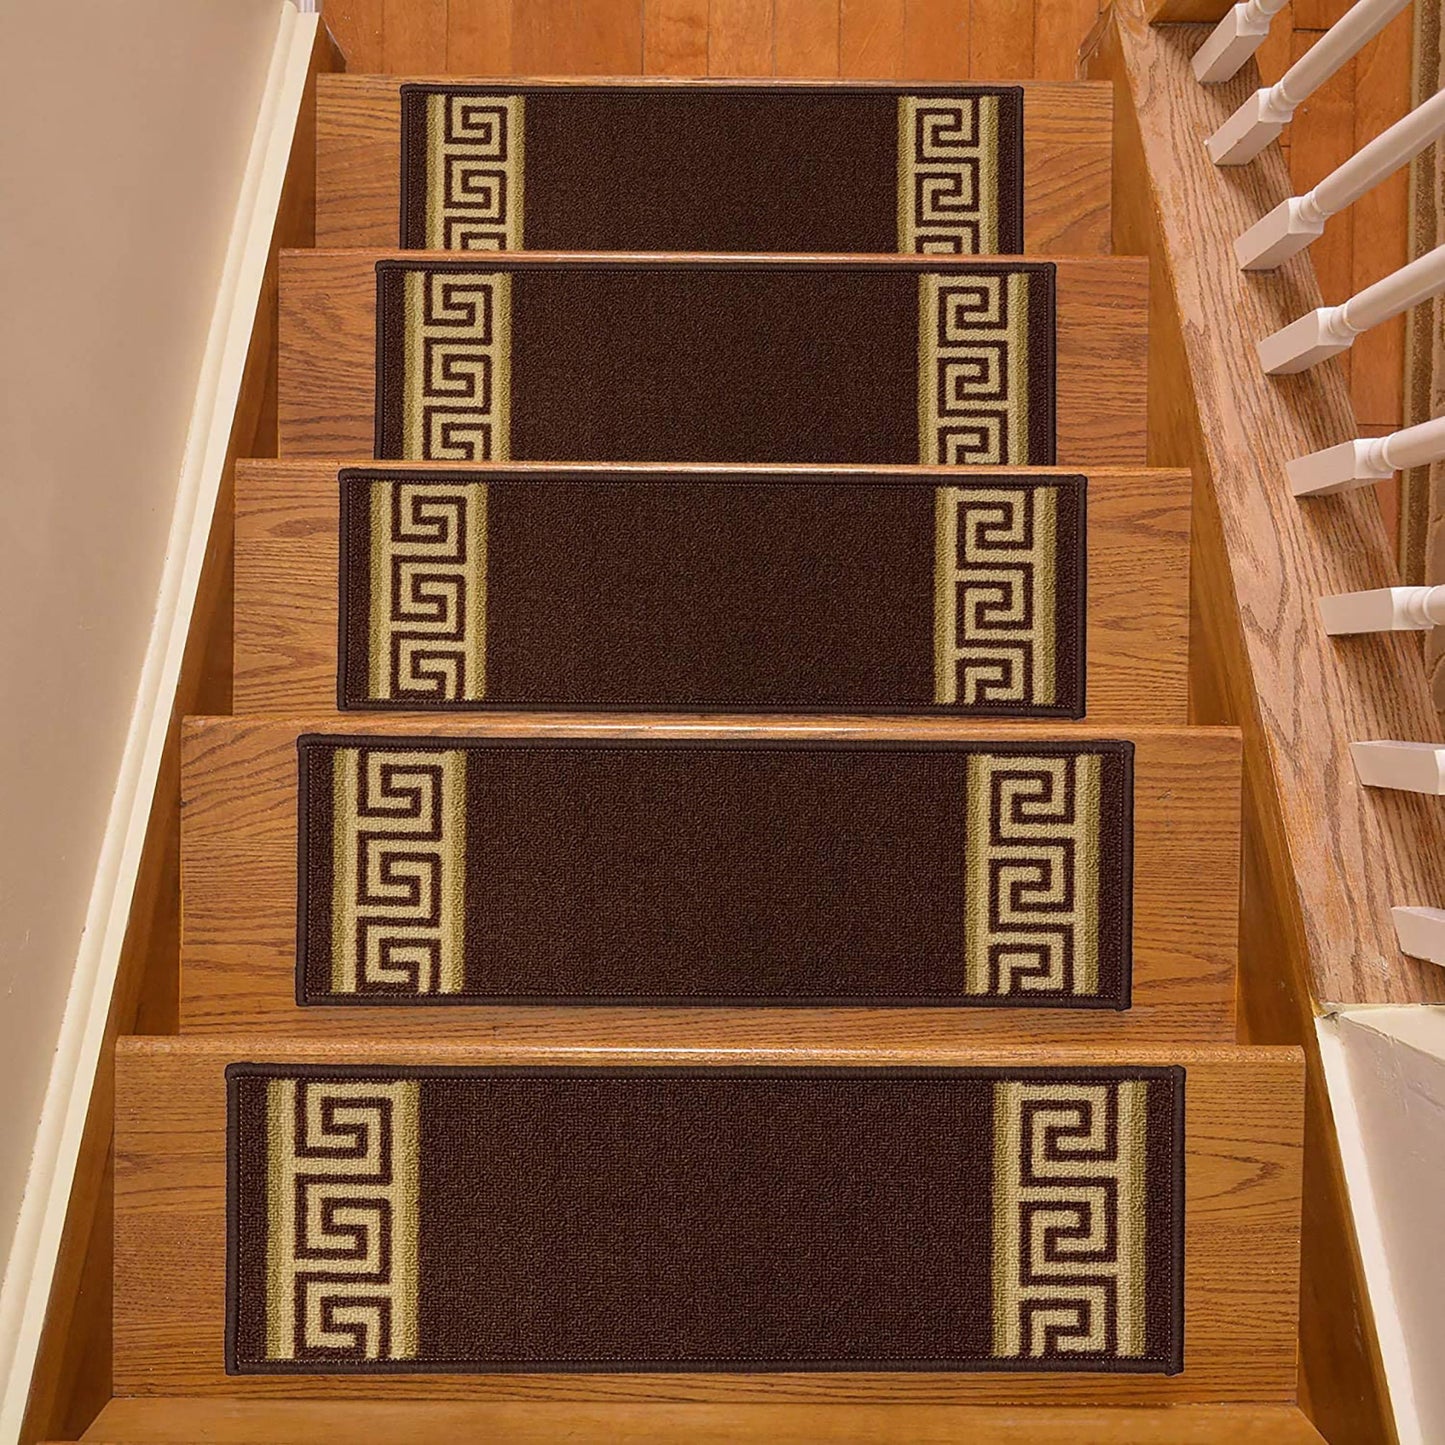 Machine Washable Stair Tread Meander Greek Key Bordered Brown Skid Resistant Latex Back Carpet Stair Treads Size 8.5" x 26" Many Set Options